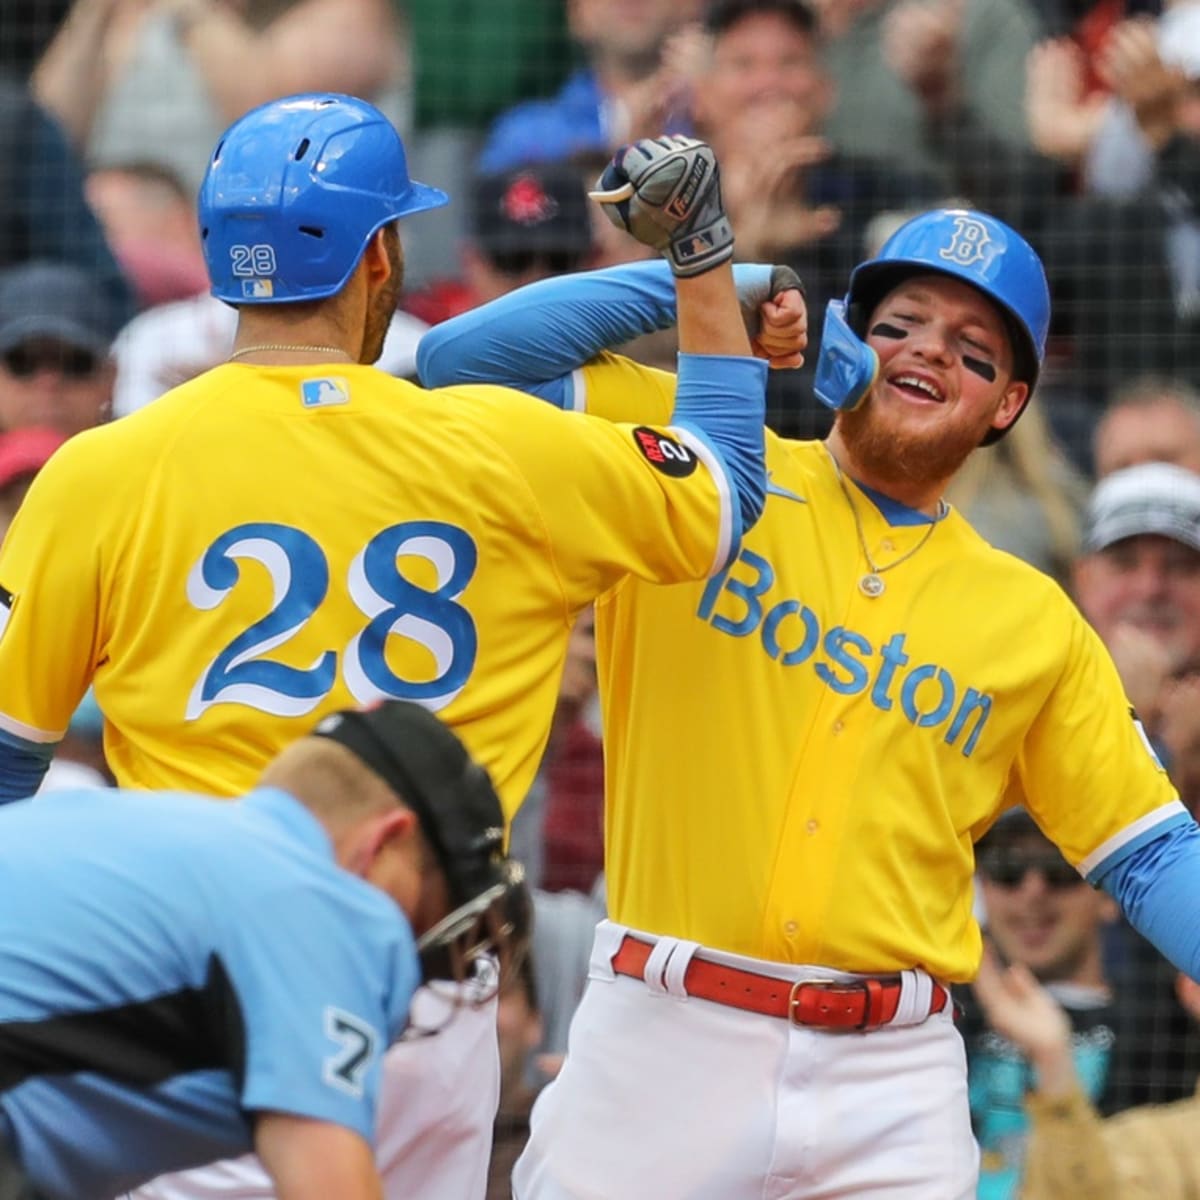 boston red sox uniforms yellow and blue